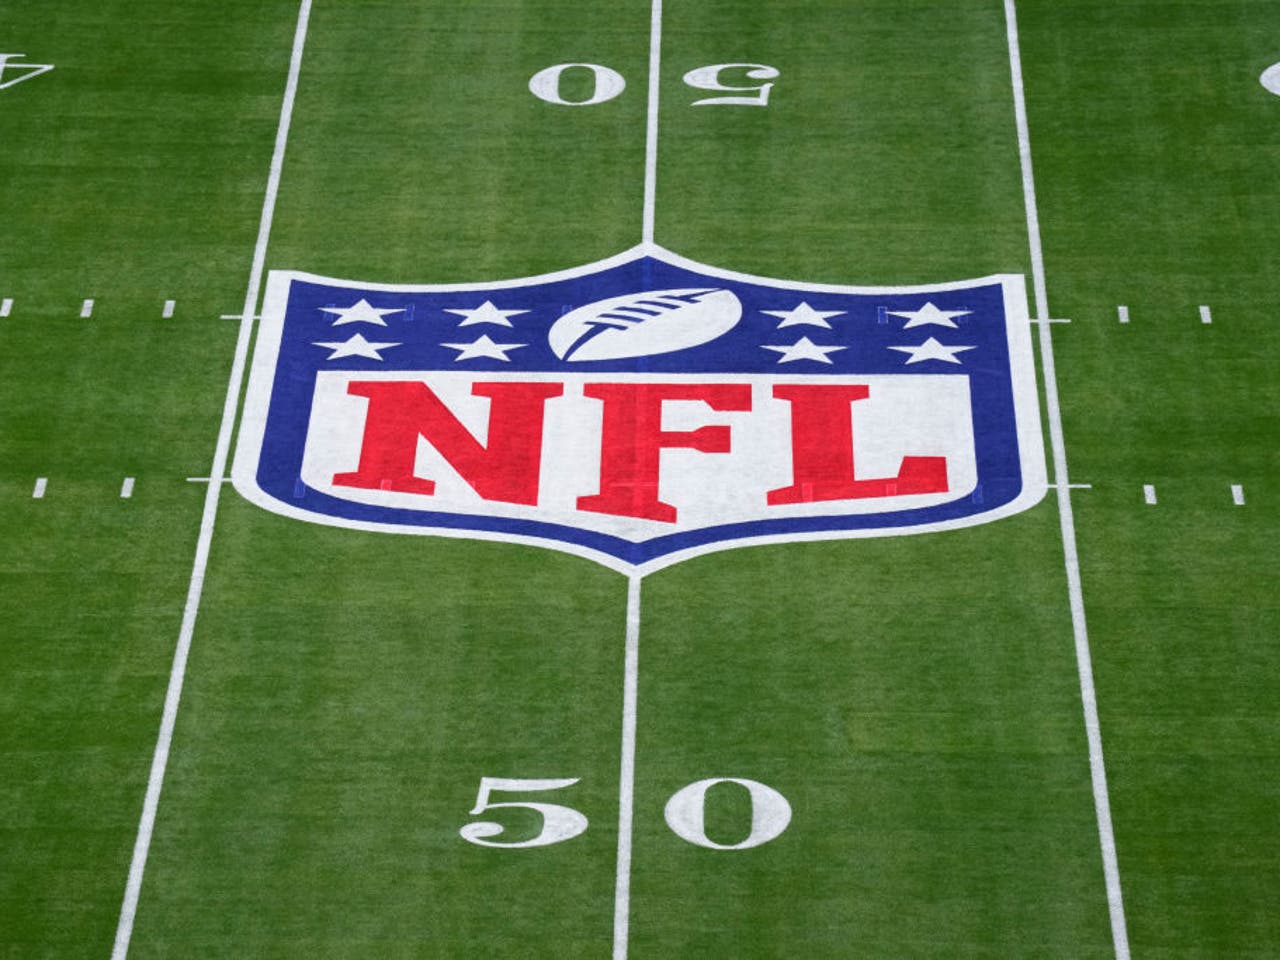 nfl: Thursday Night Football Week 1: What time is it? Check TV Channel,  Schedule Live streaming details of the NFL game - The Economic Times